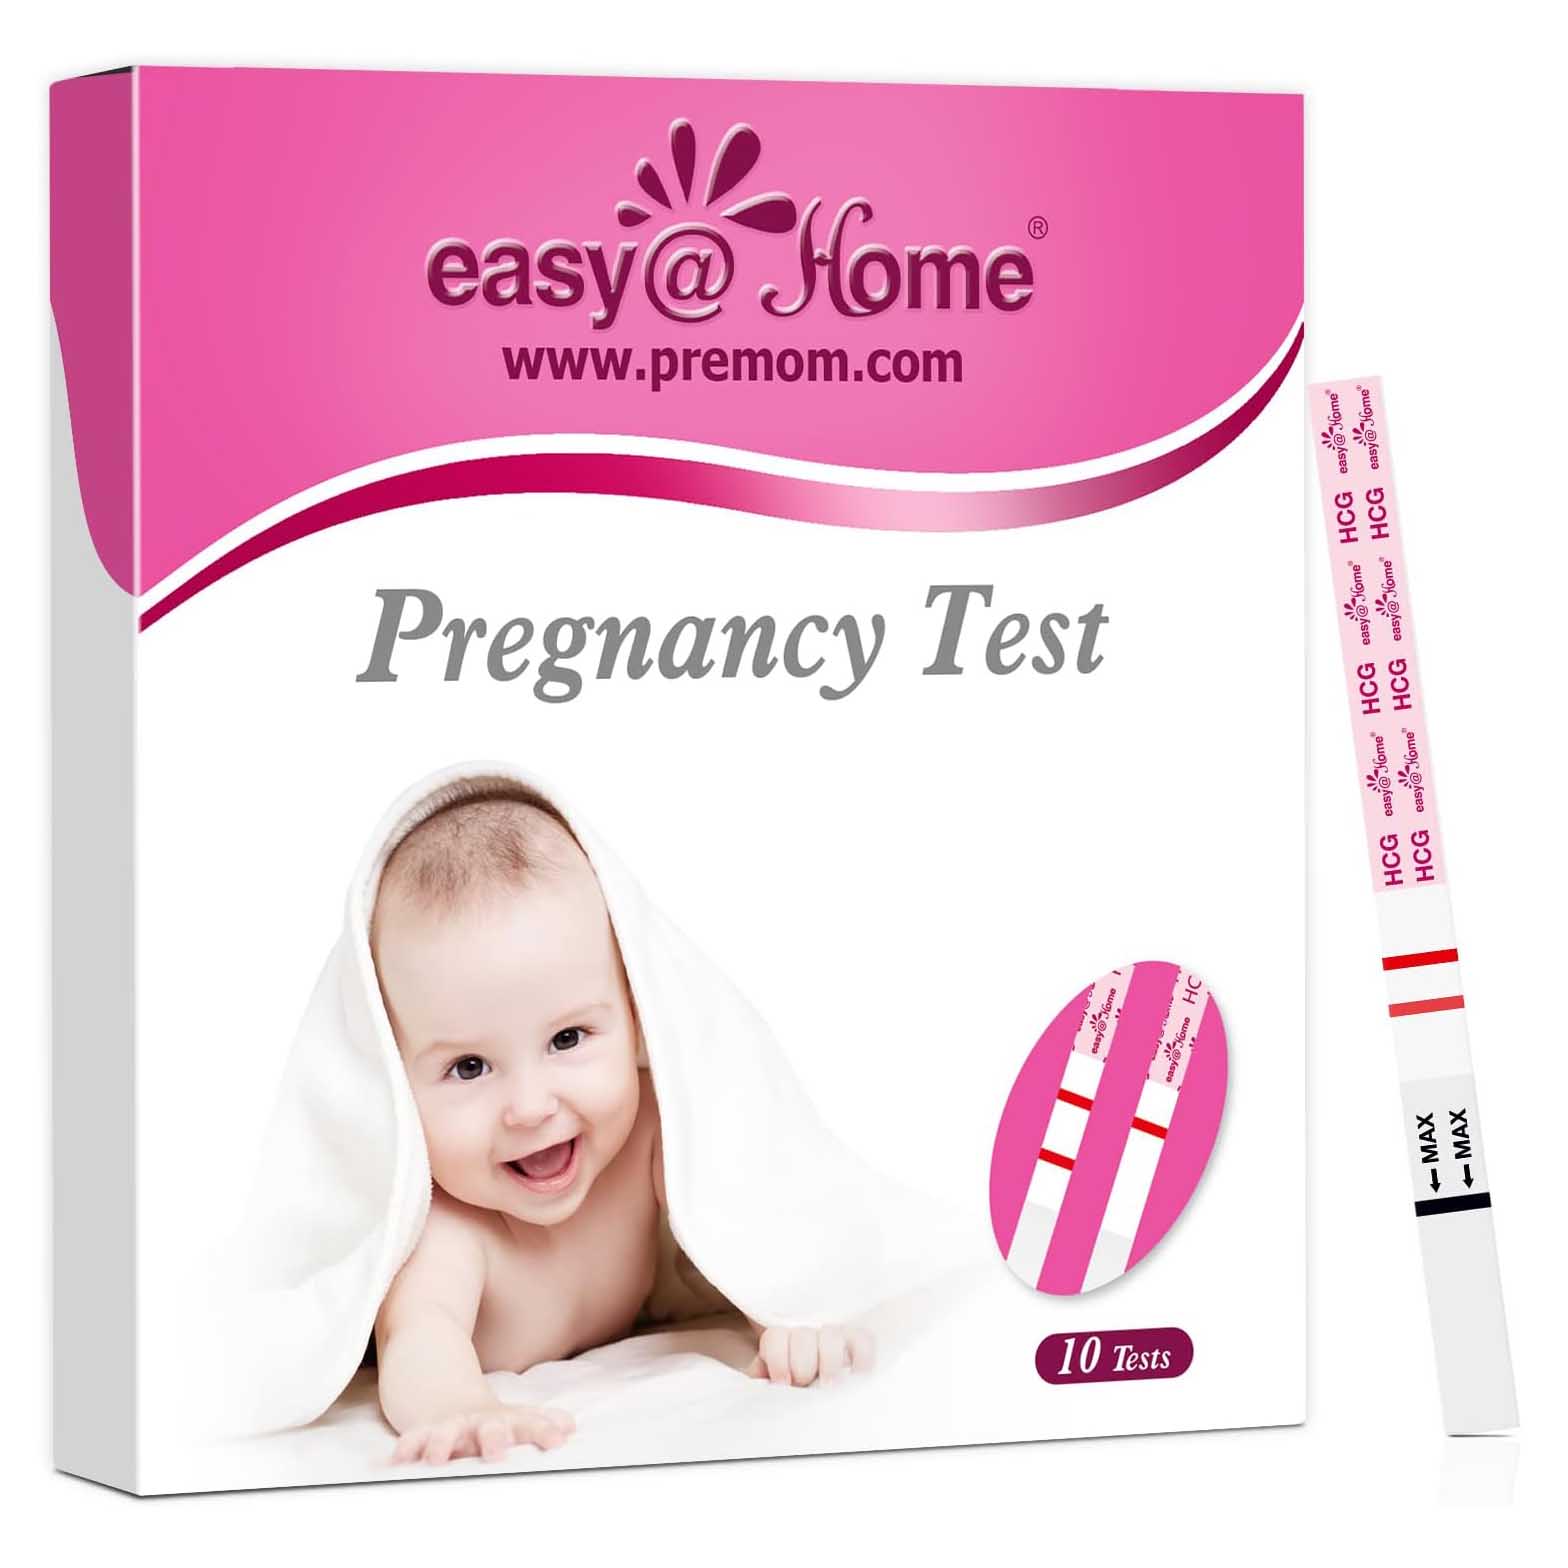 Pregnancy test in pink square box with strip test on the side